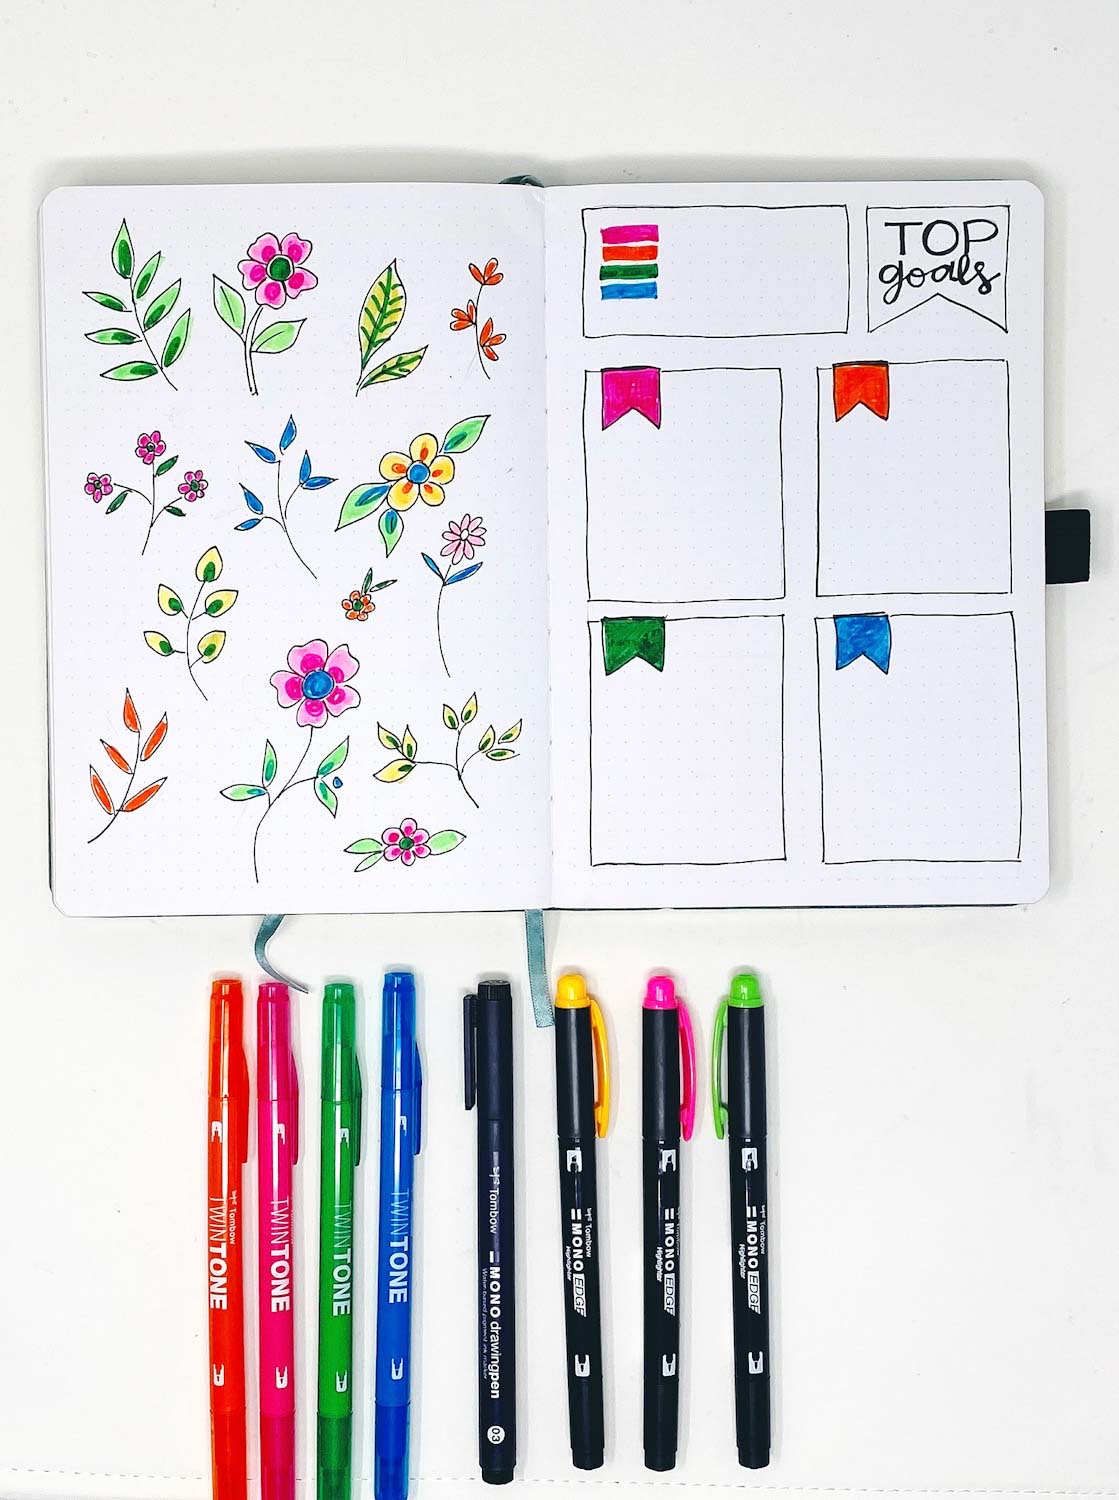 The Best Tombow Products for Your Journals - Tombow USA Blog